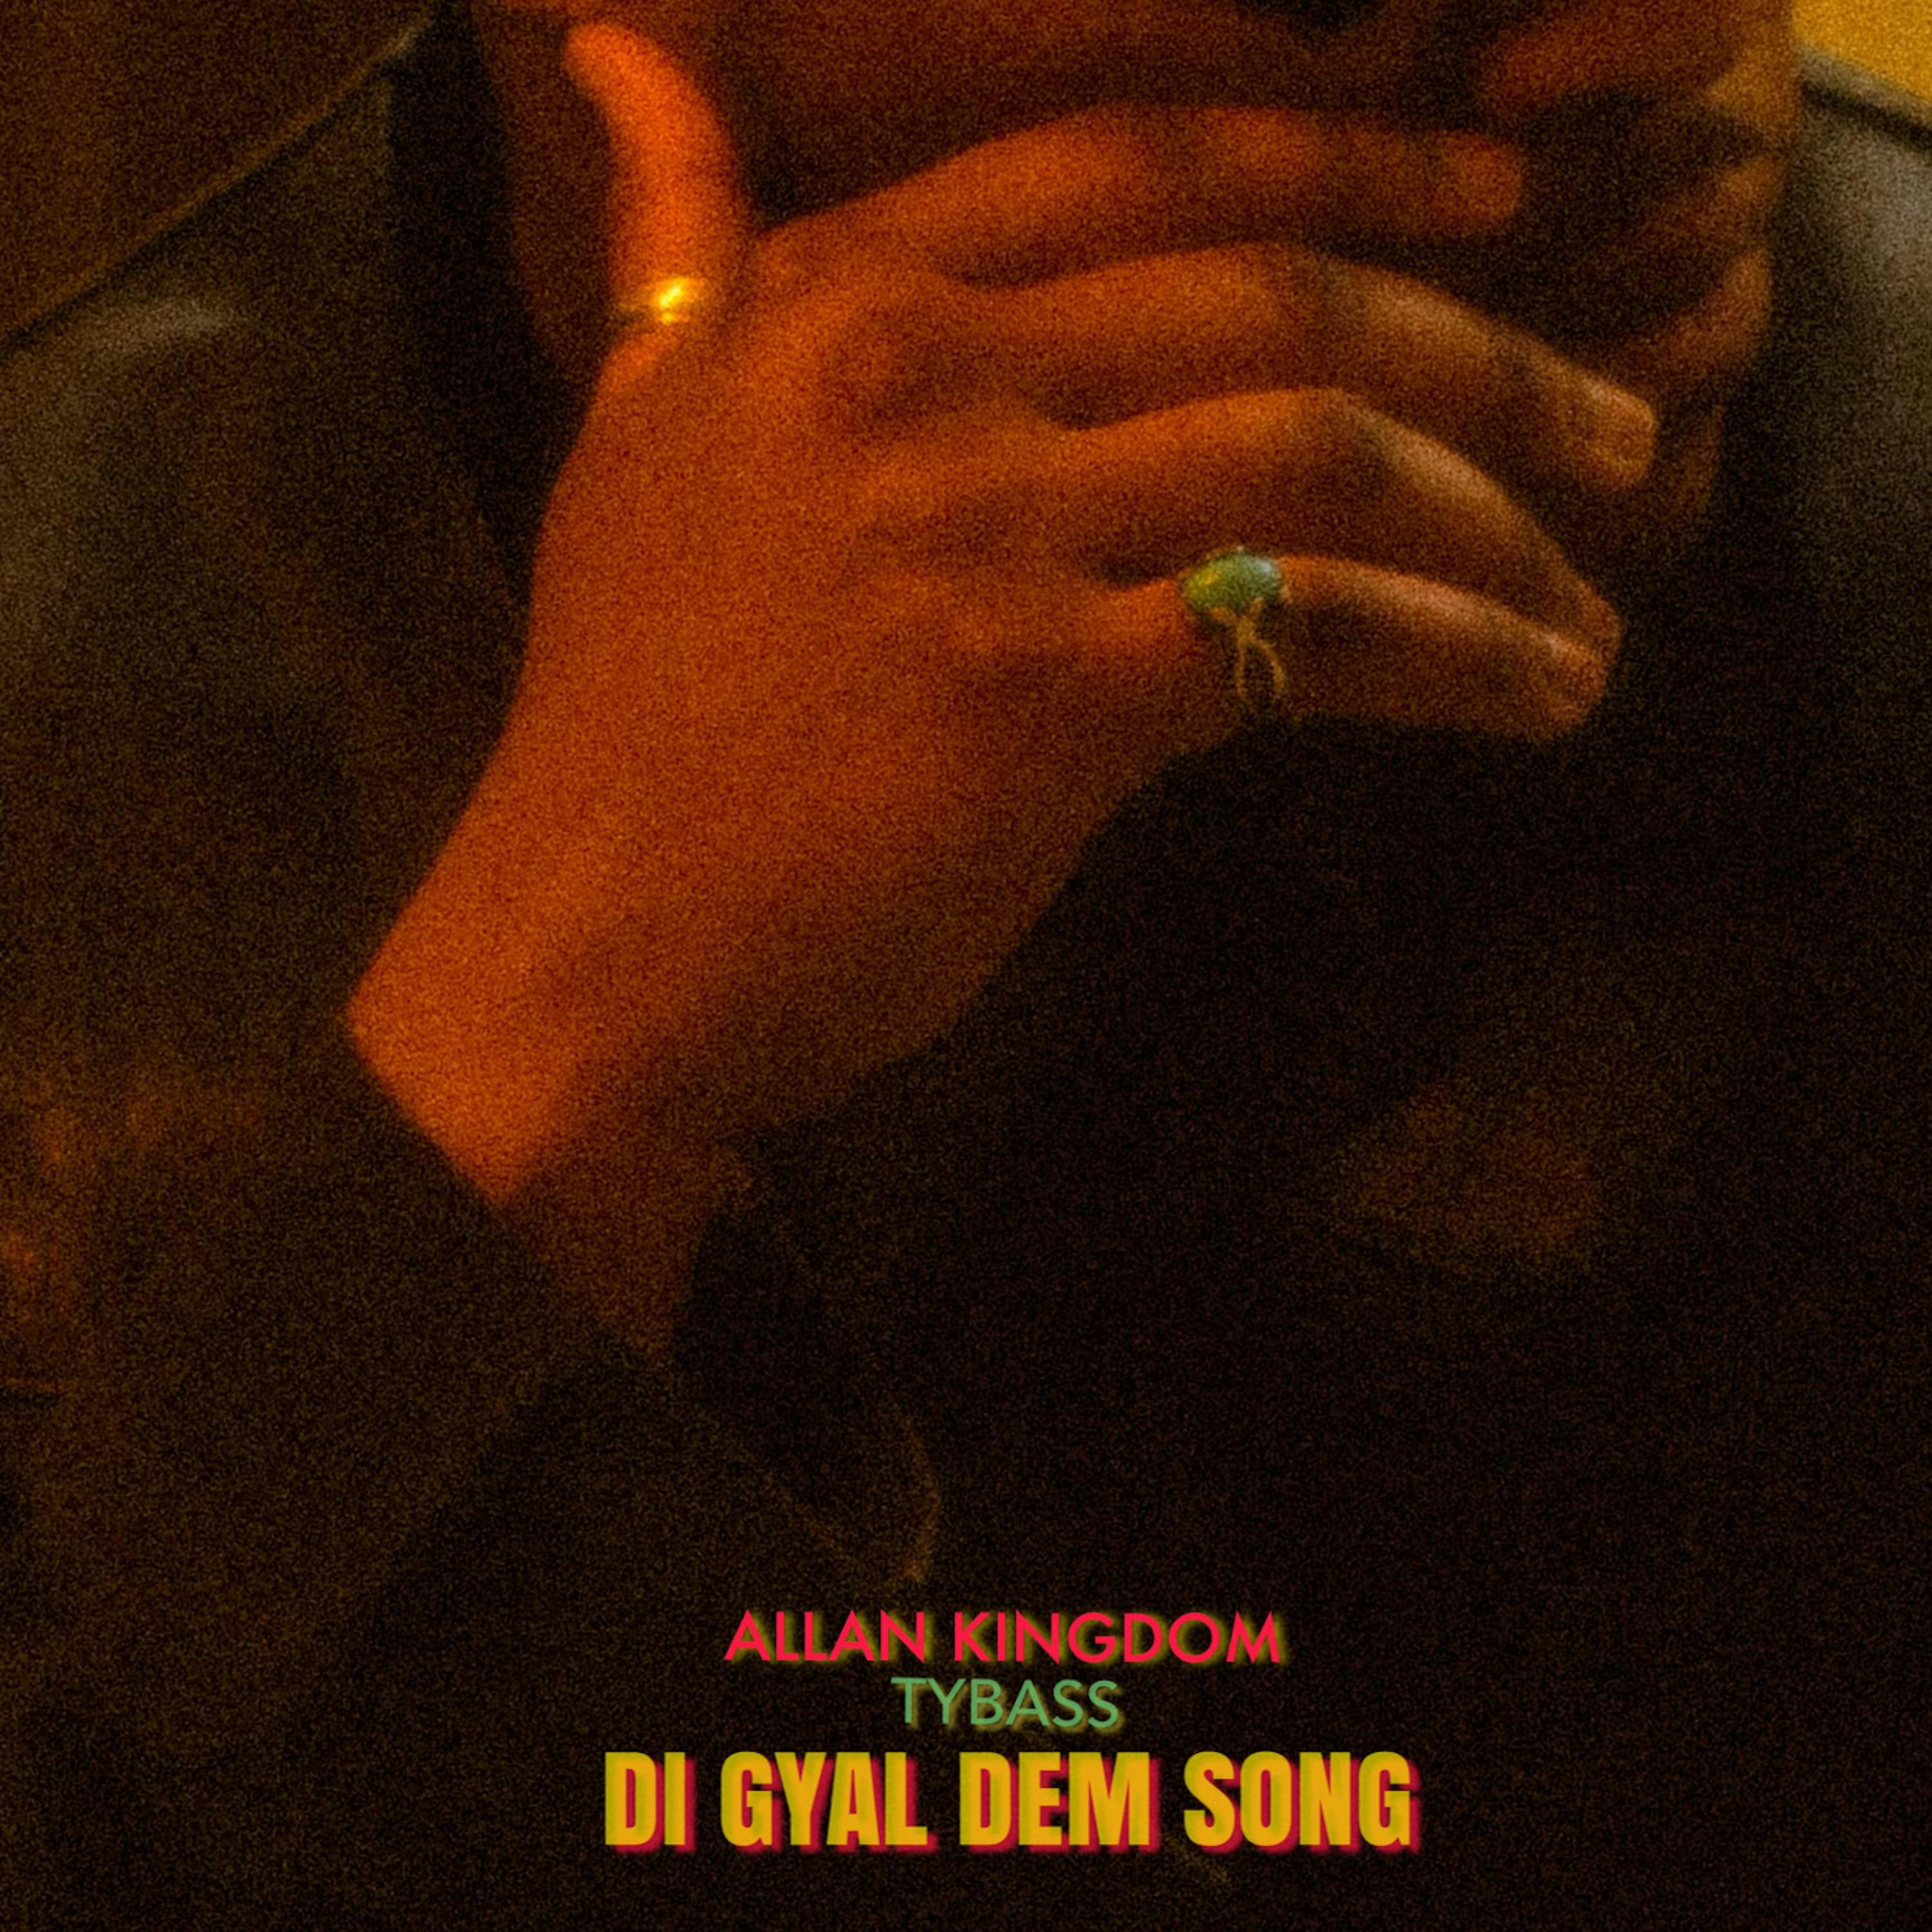 Cover art for Di Gyal Dem Song by Allan Kingdom